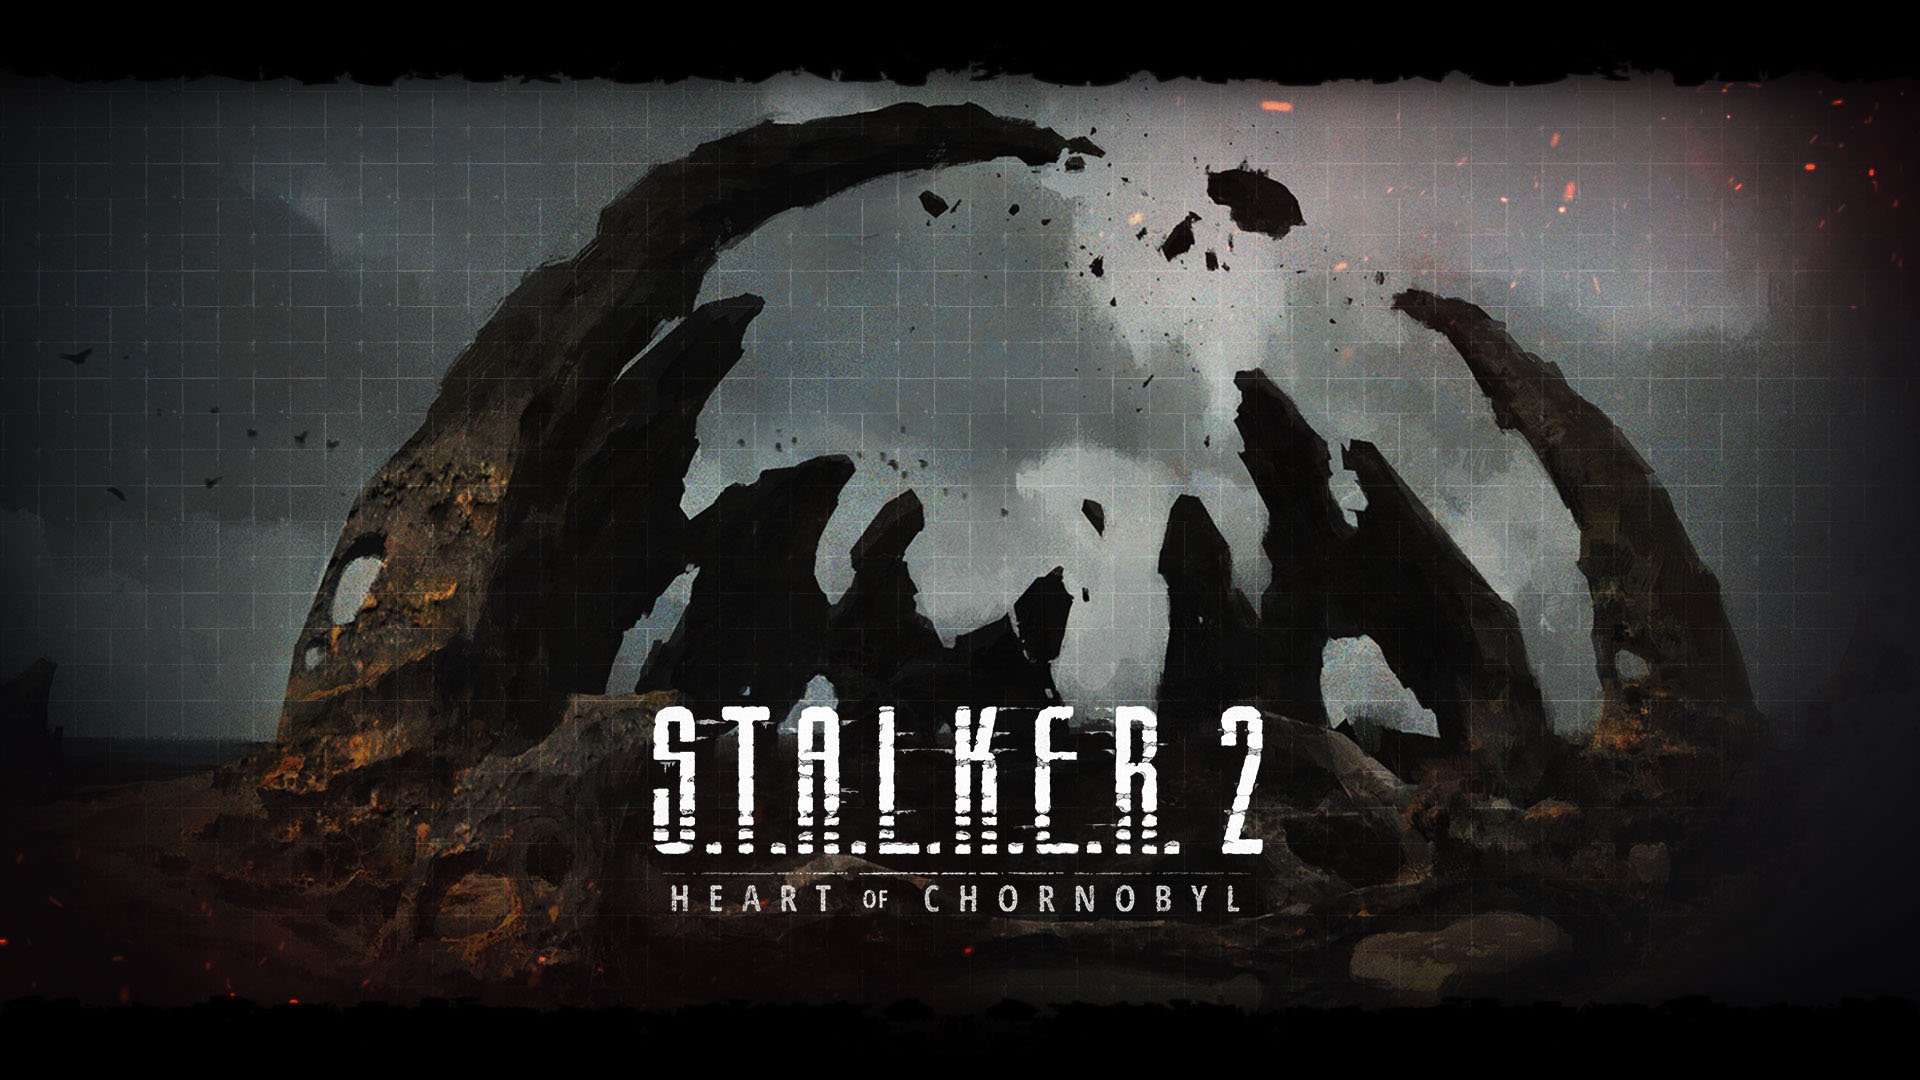 STALKER 2 delayed to 2023, new trailer for Xbox and PC game